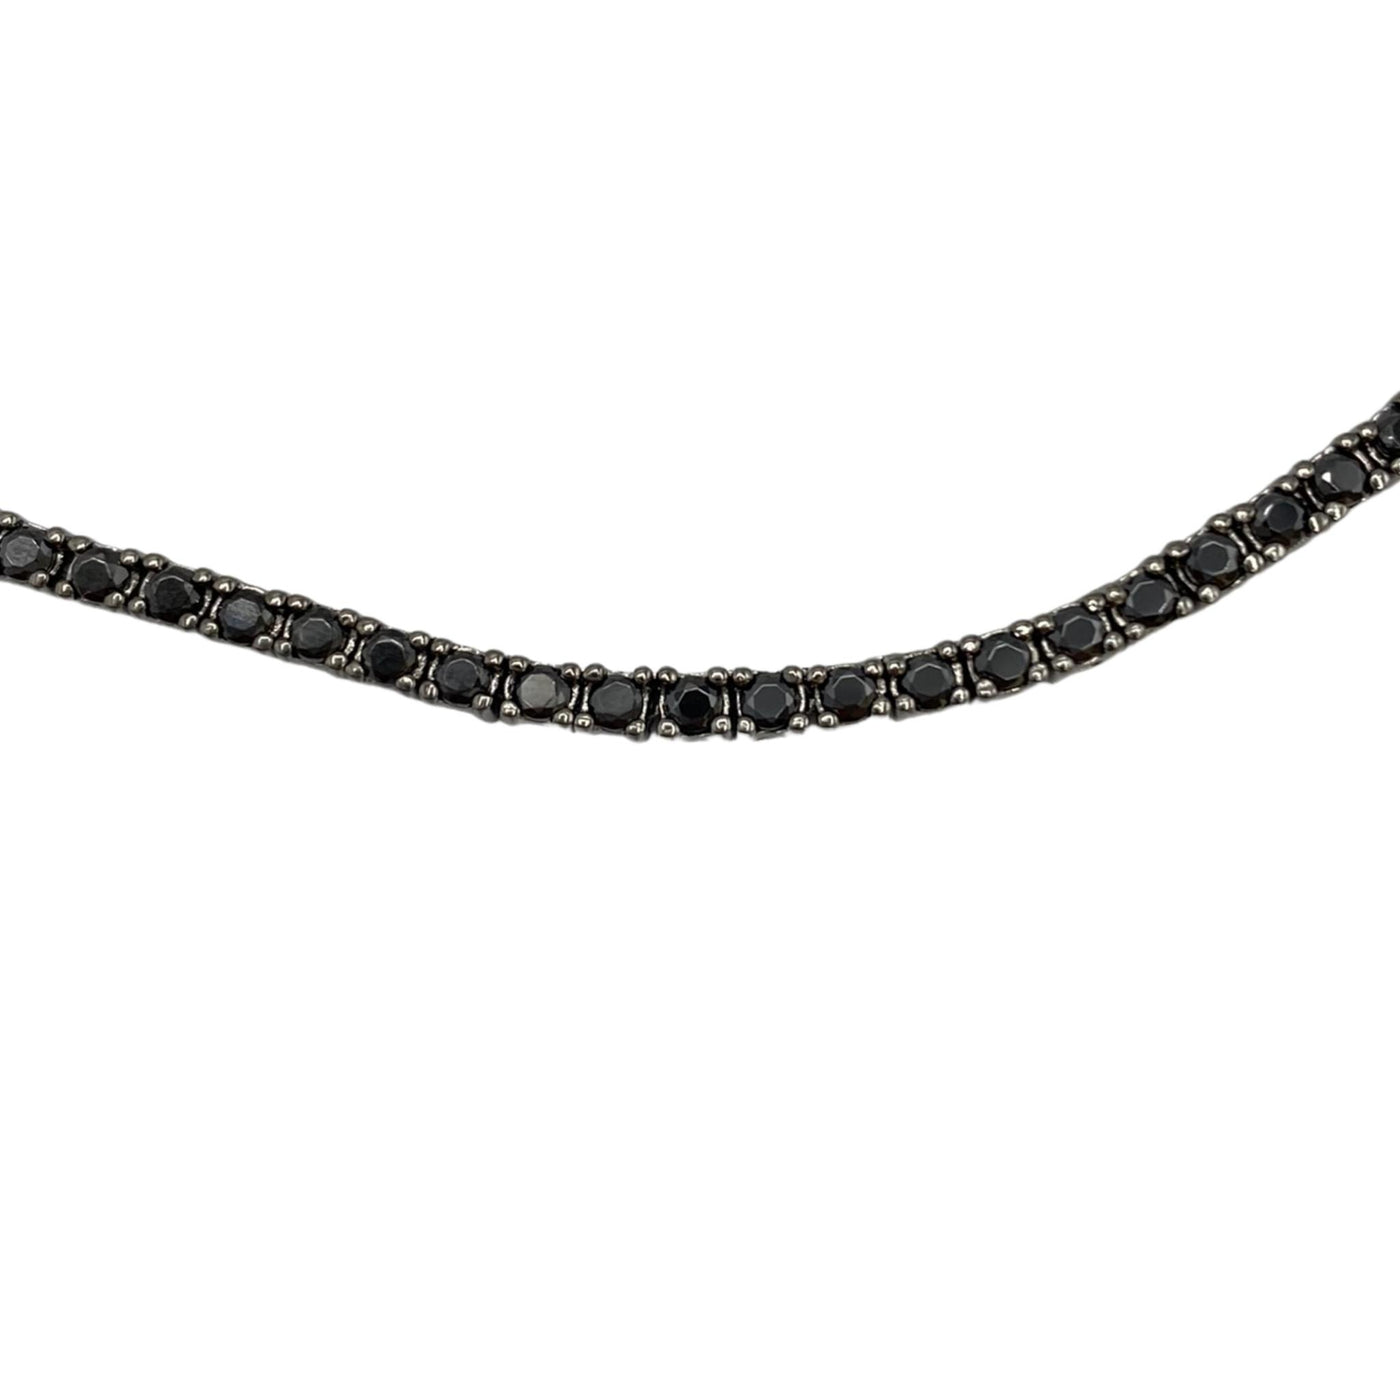 Silver casting tennis necklace with black zirconia - 2 mm